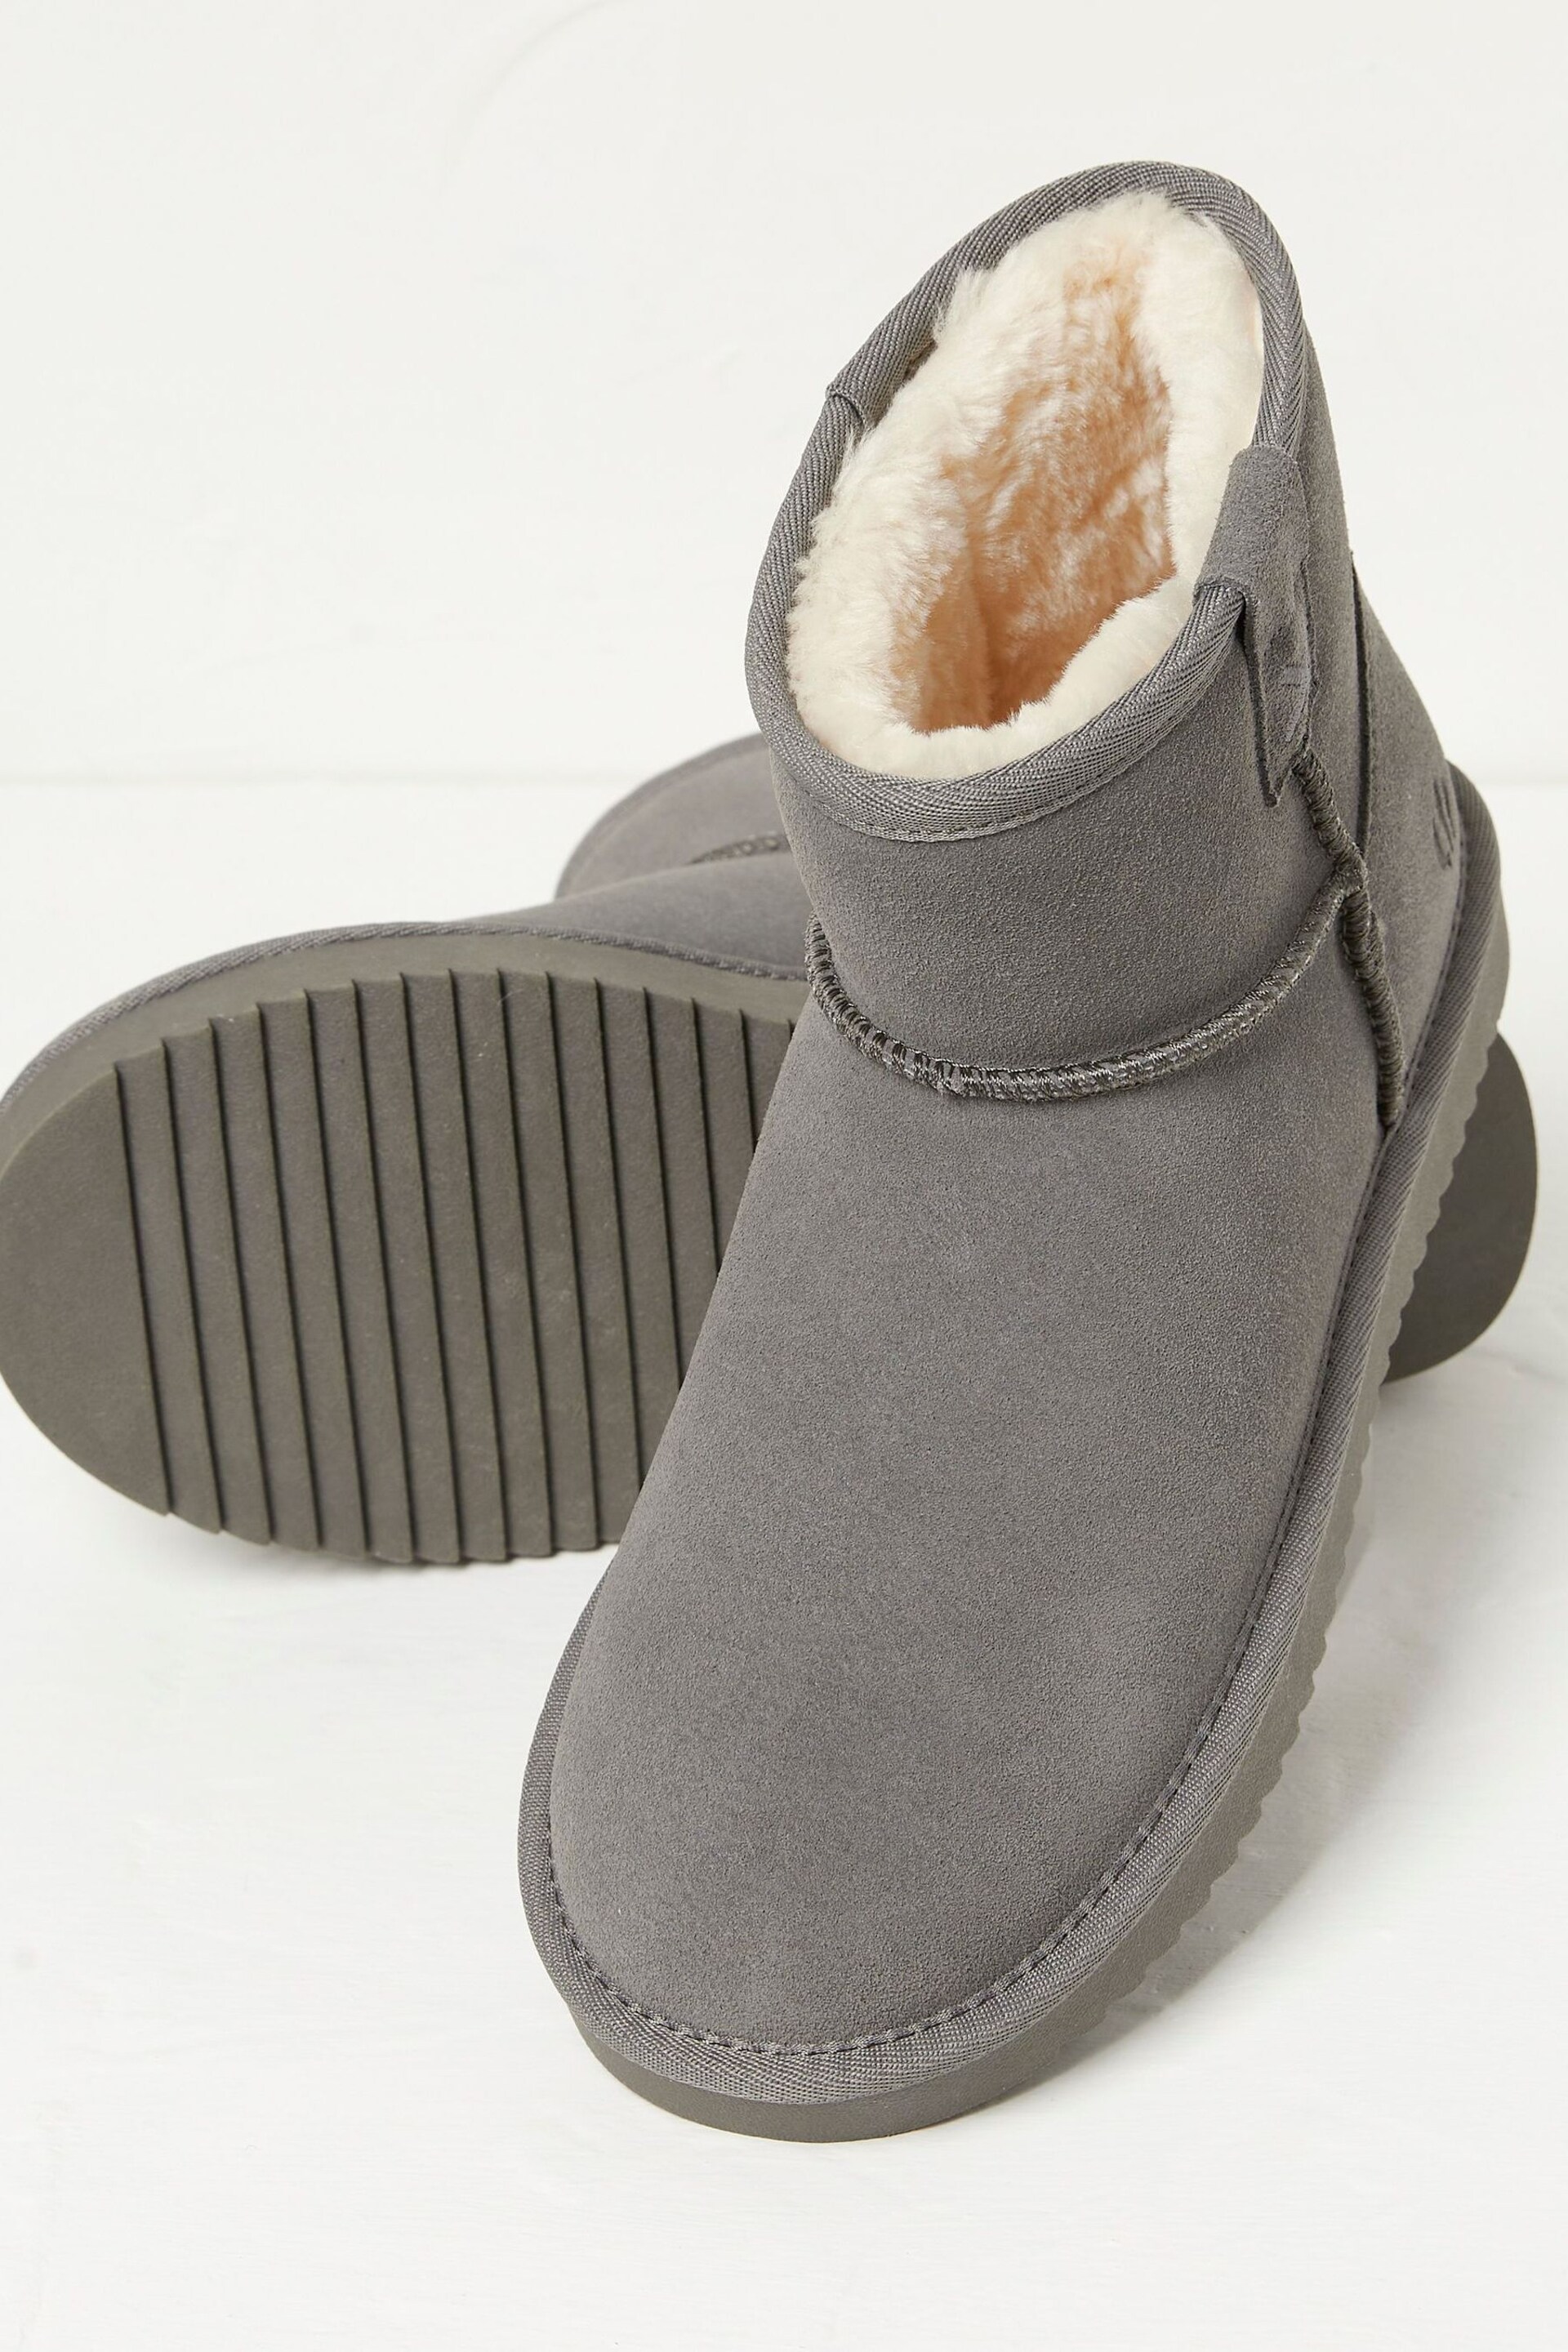 FatFace Grey Suede Slipper Boots - Image 3 of 4